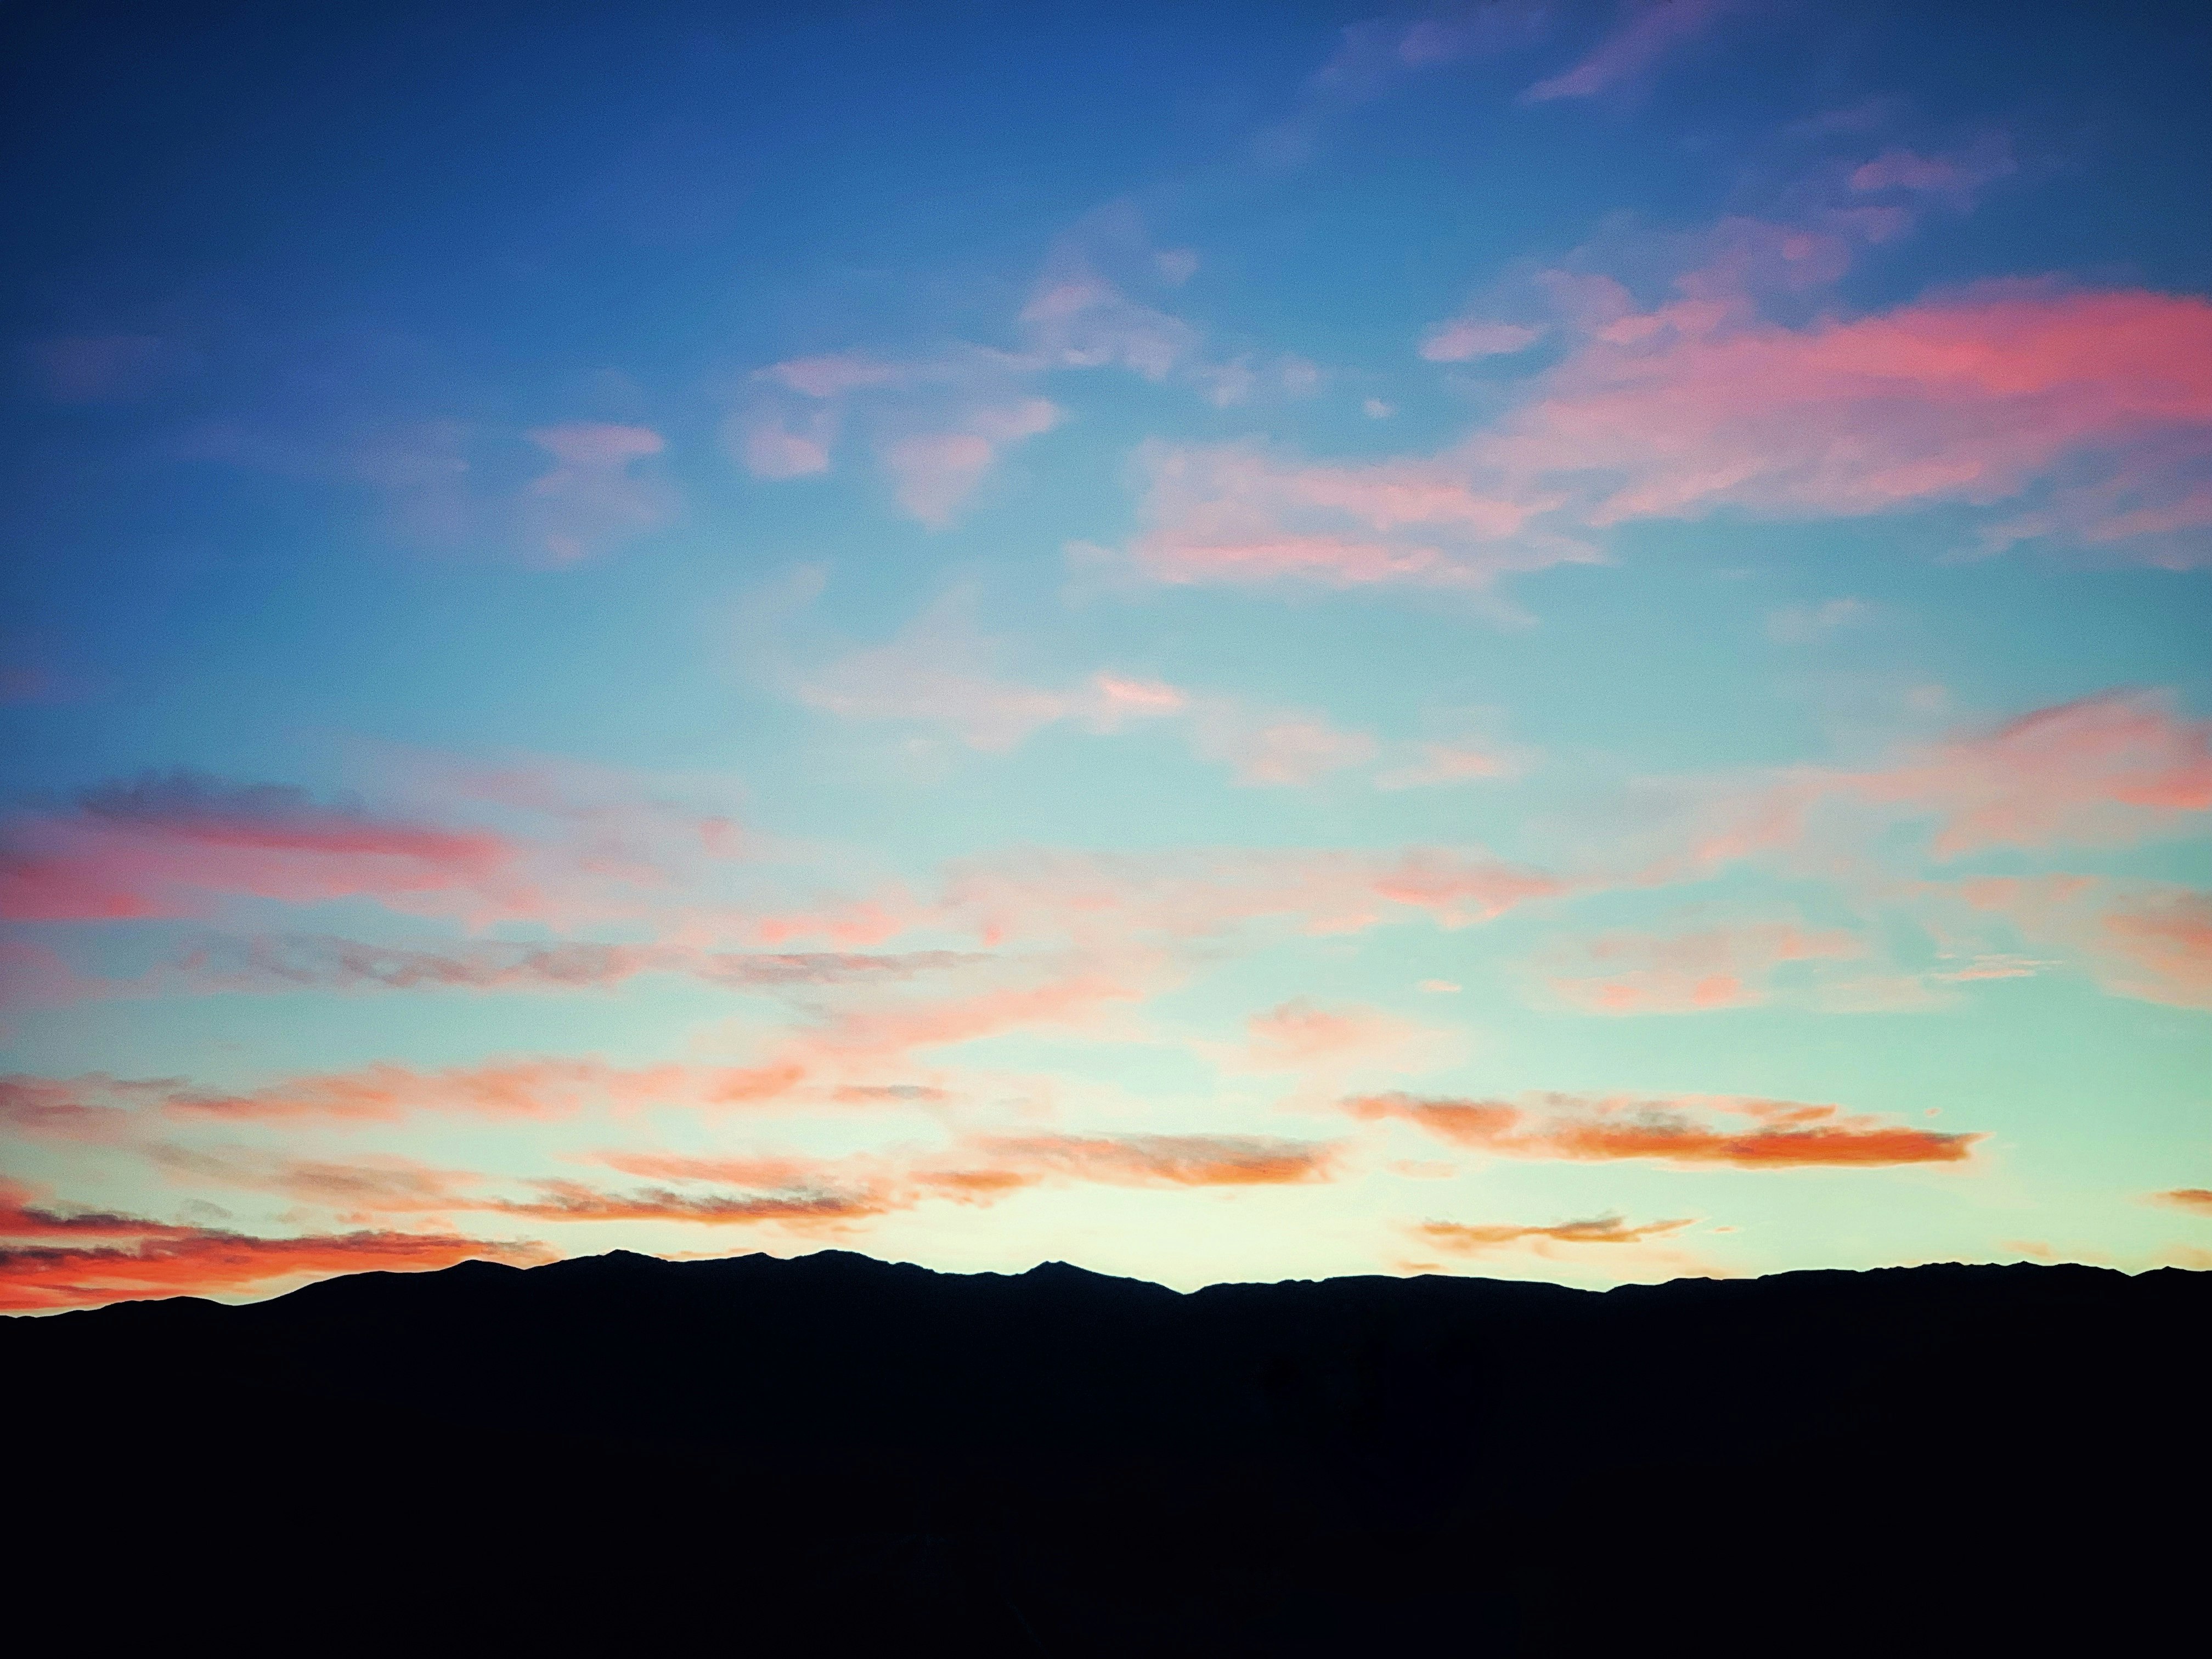 silhouette of mountains under red clouds and blue sky